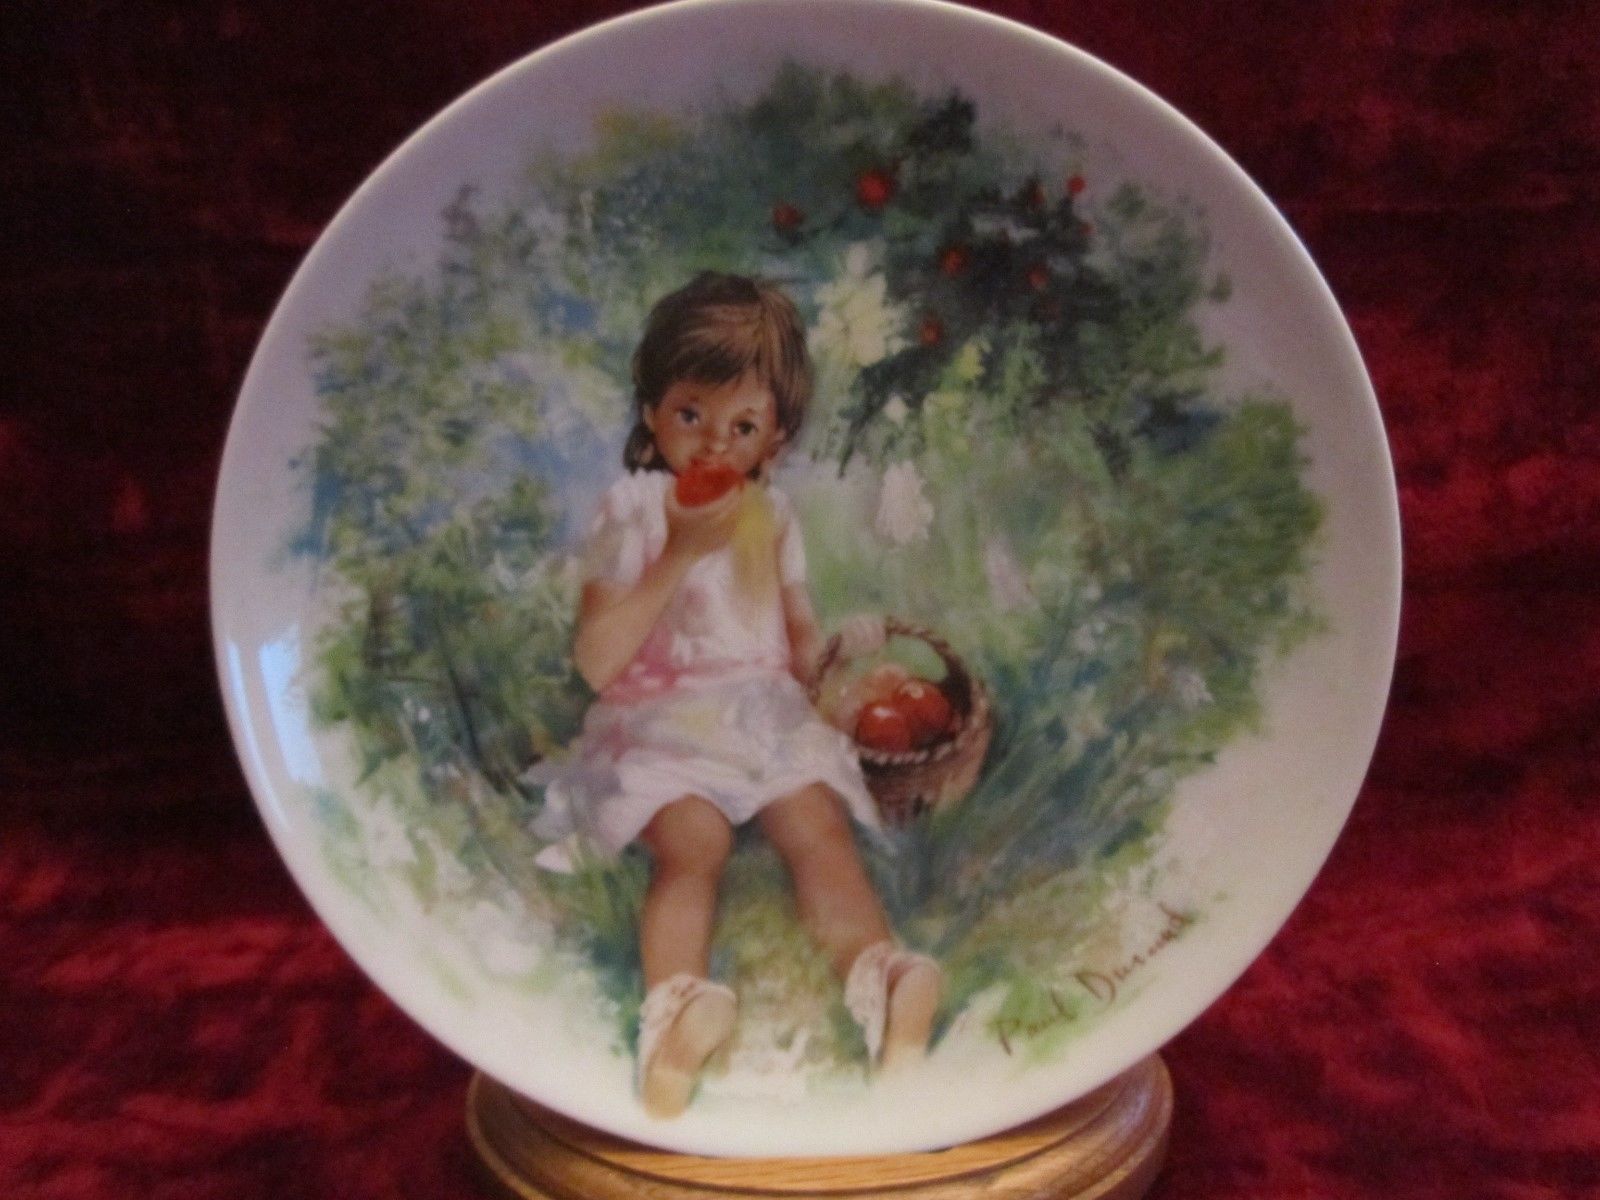 MARIE-ANGE collector plate PAUL DURAND Limoges CHILDREN France apple tree - $1.99